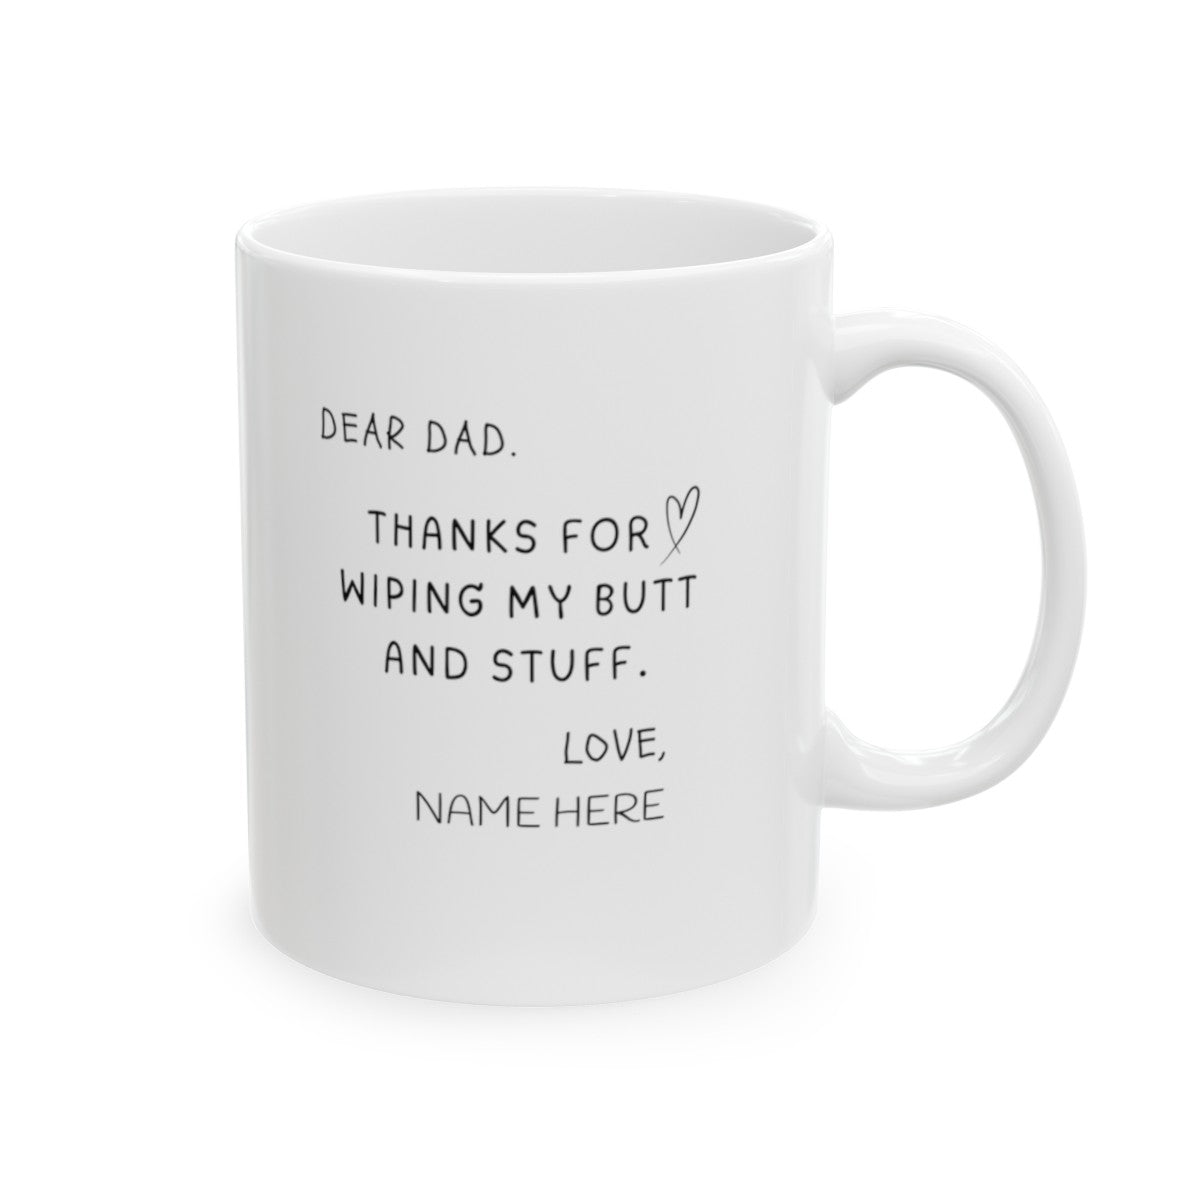 Dear Dad Thanks For Wiping My Butt, Personalized Dad Coffee Mug, Dad Gift From Daughter/Son, Dad Coffee Cup, Dad Coffee Mug From Daughter